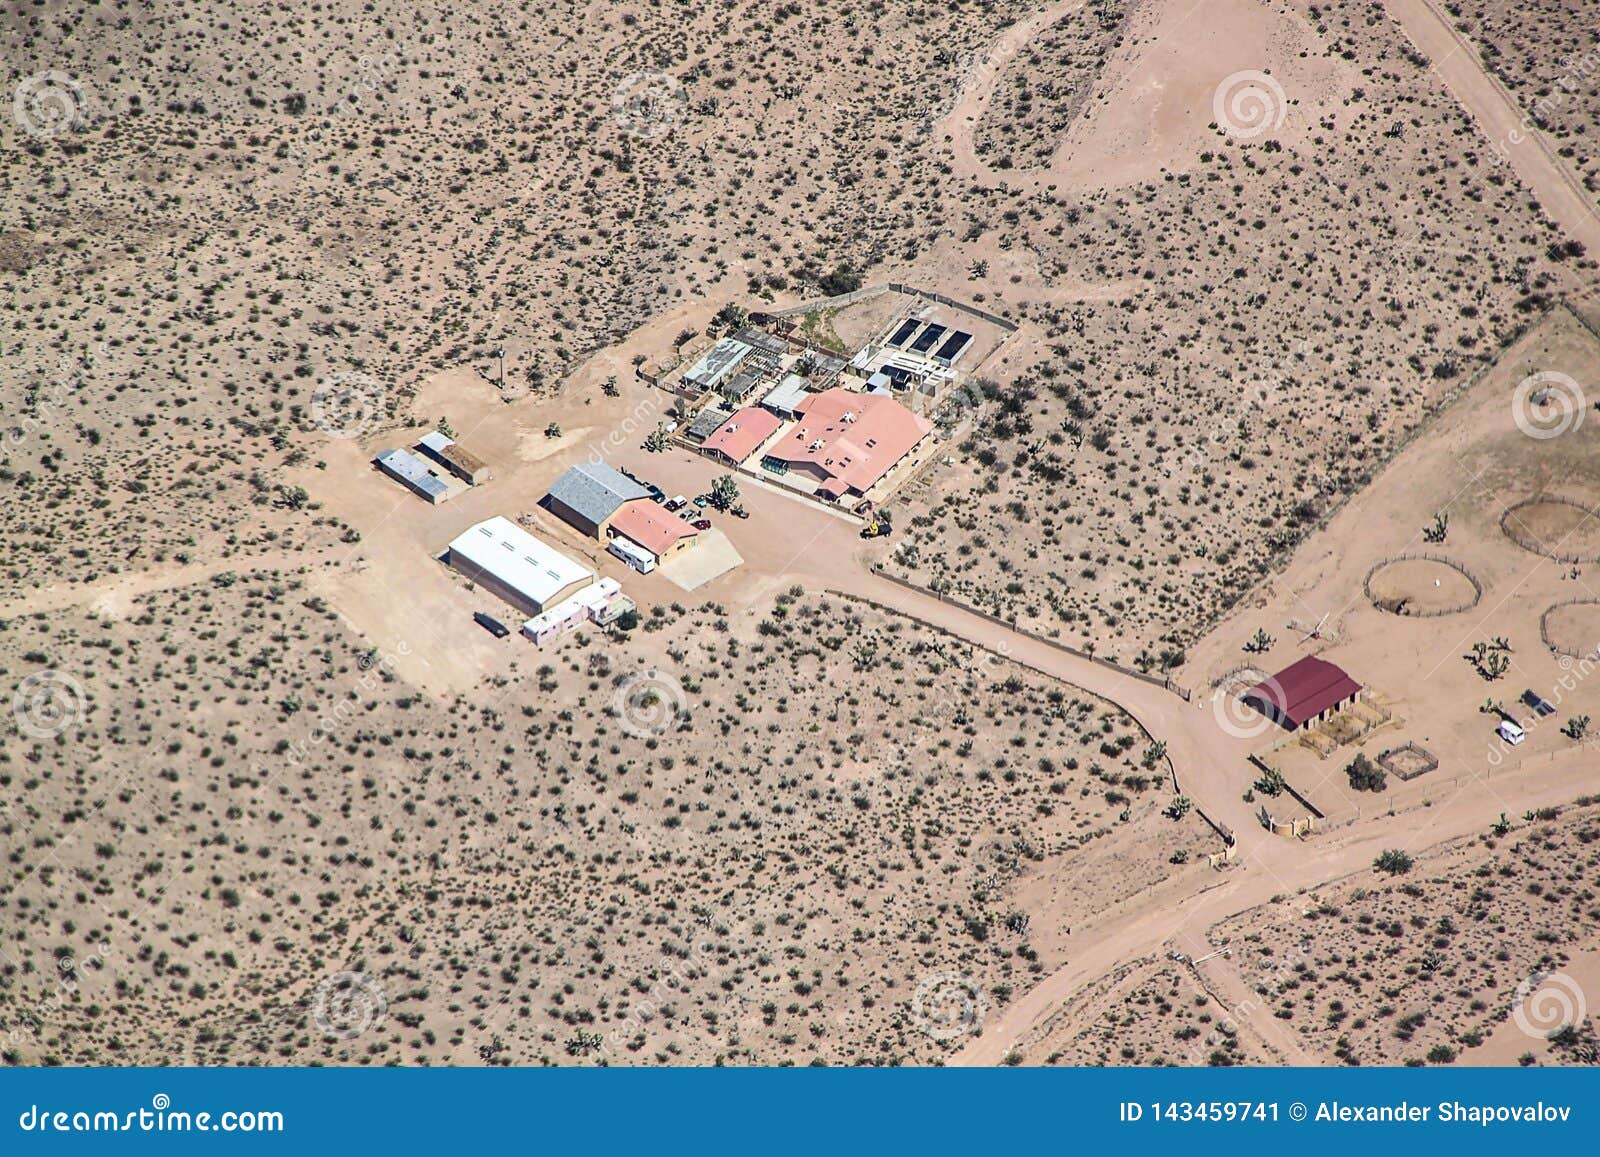 beautiful view from helikopter down on houses in grand canyon.